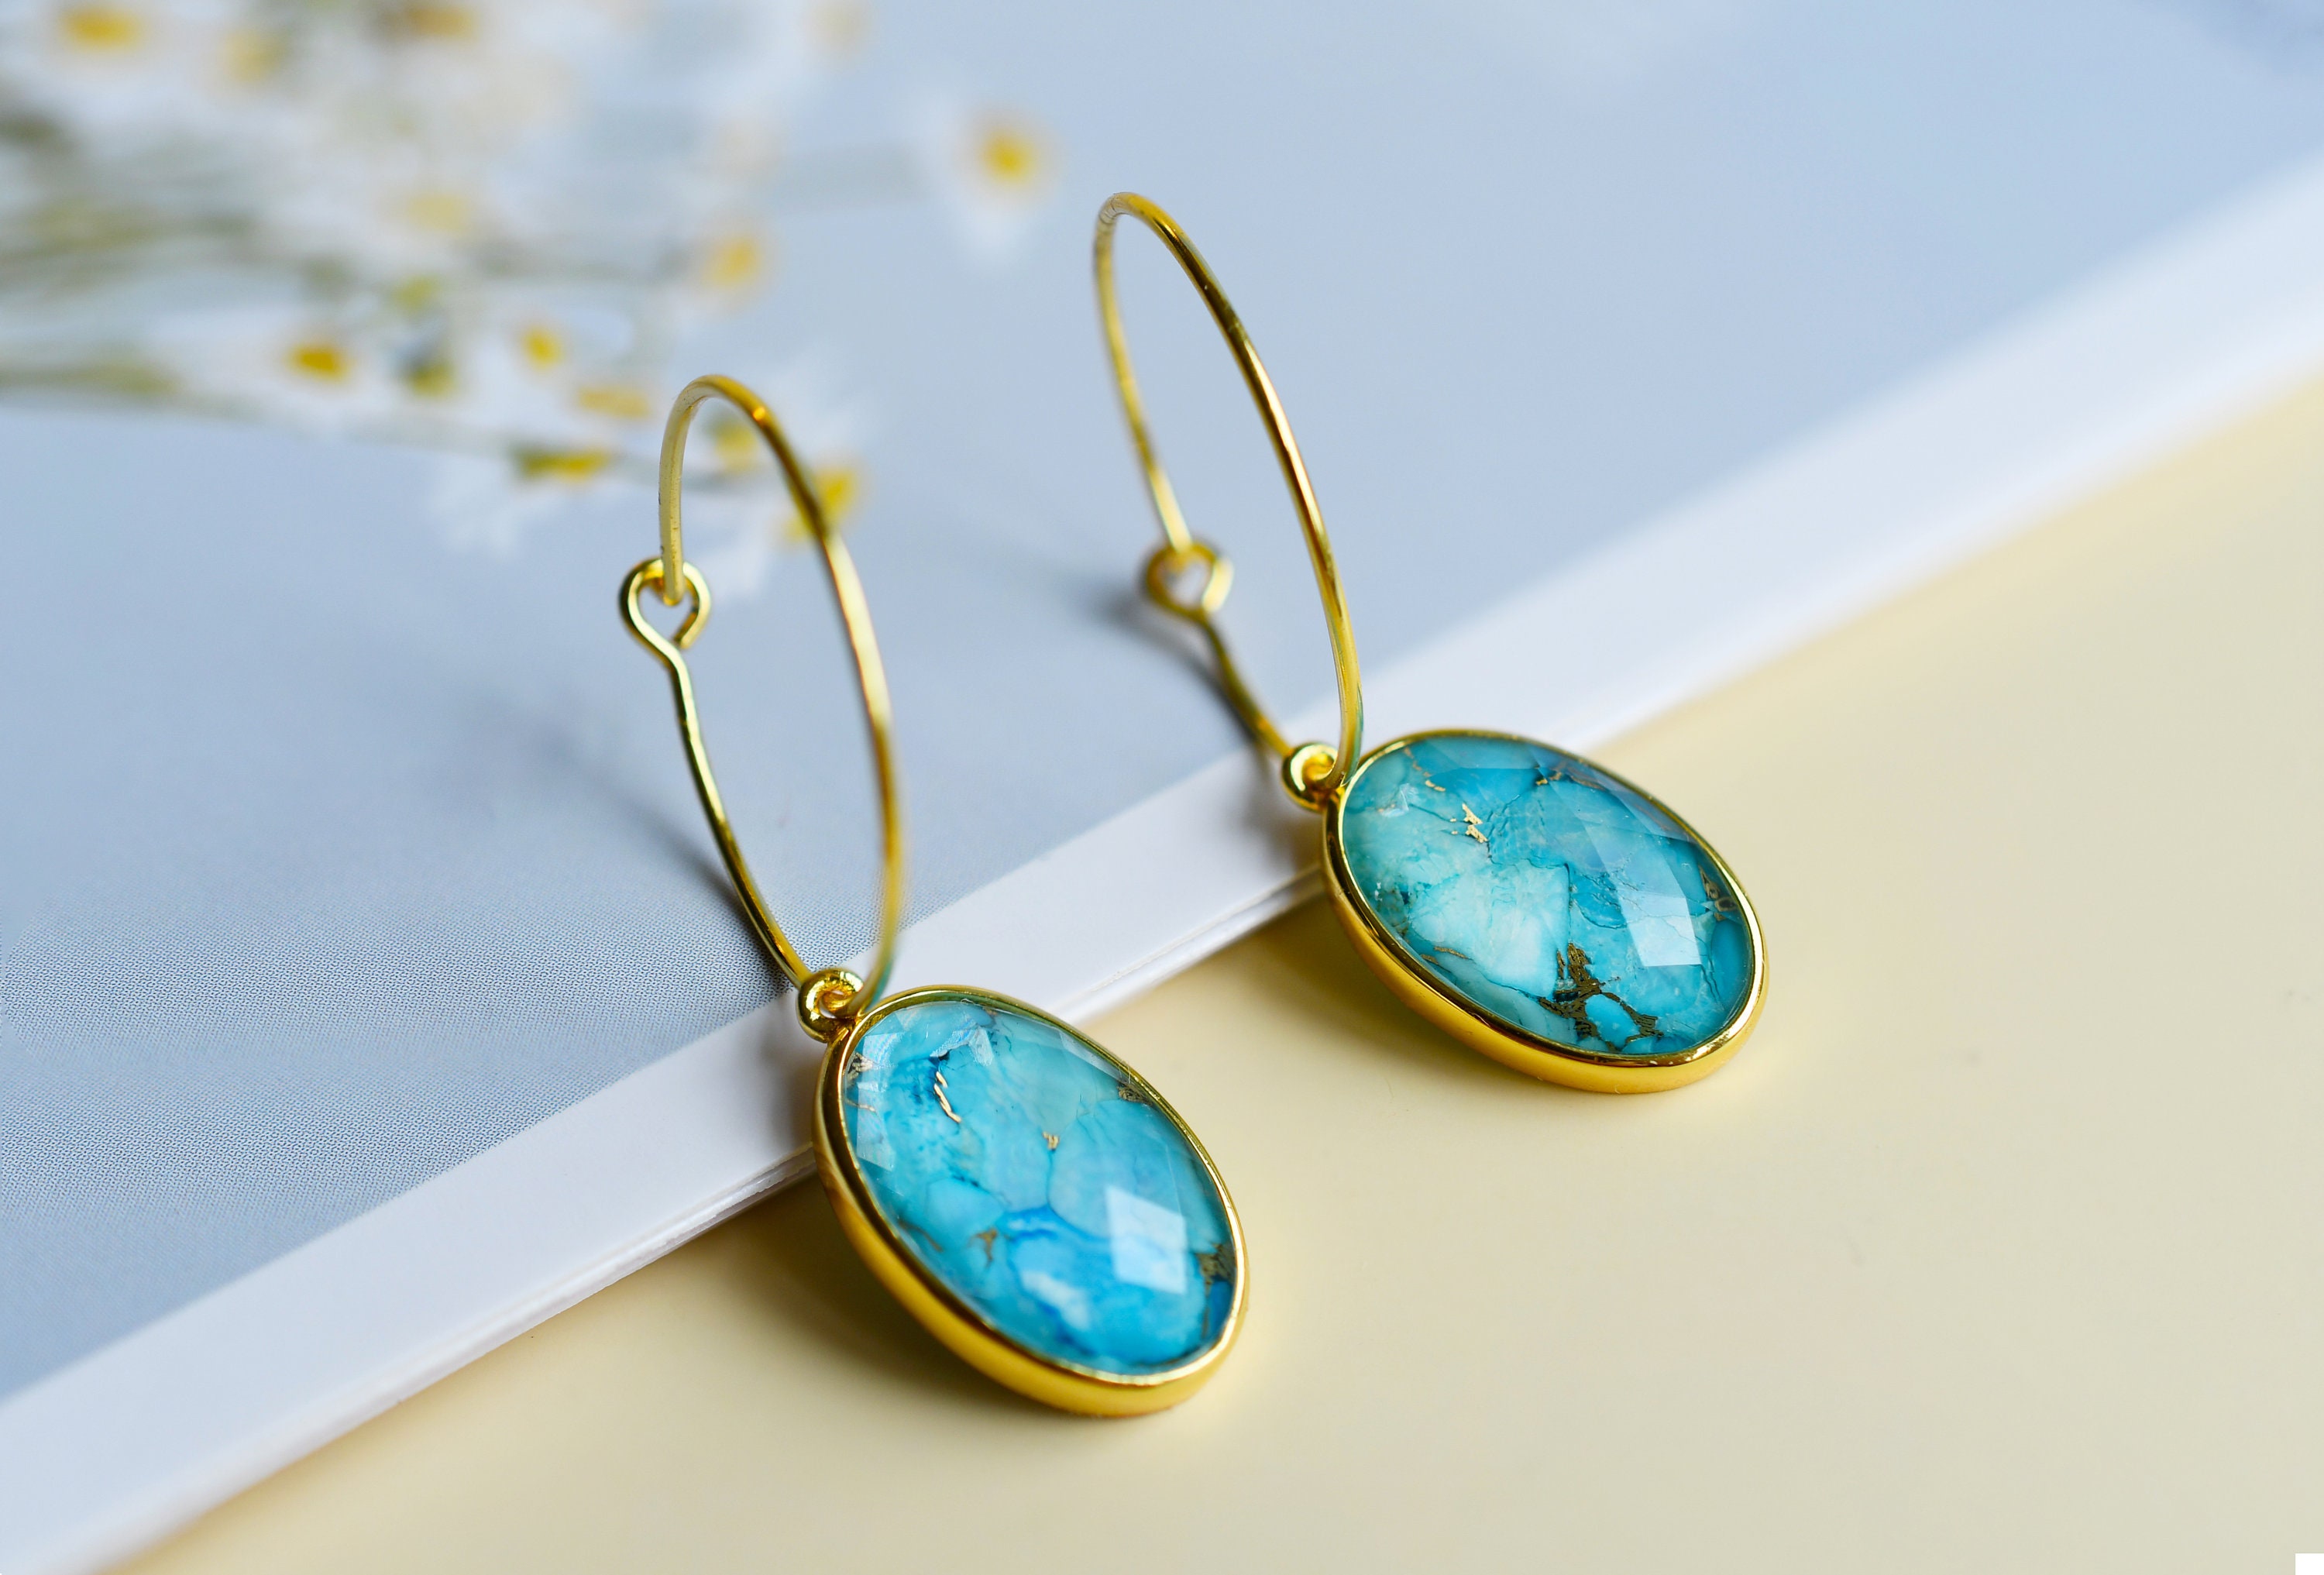 Turquoise earrings made of high quality genuine turquoise gems  Sterlingsilver Unique